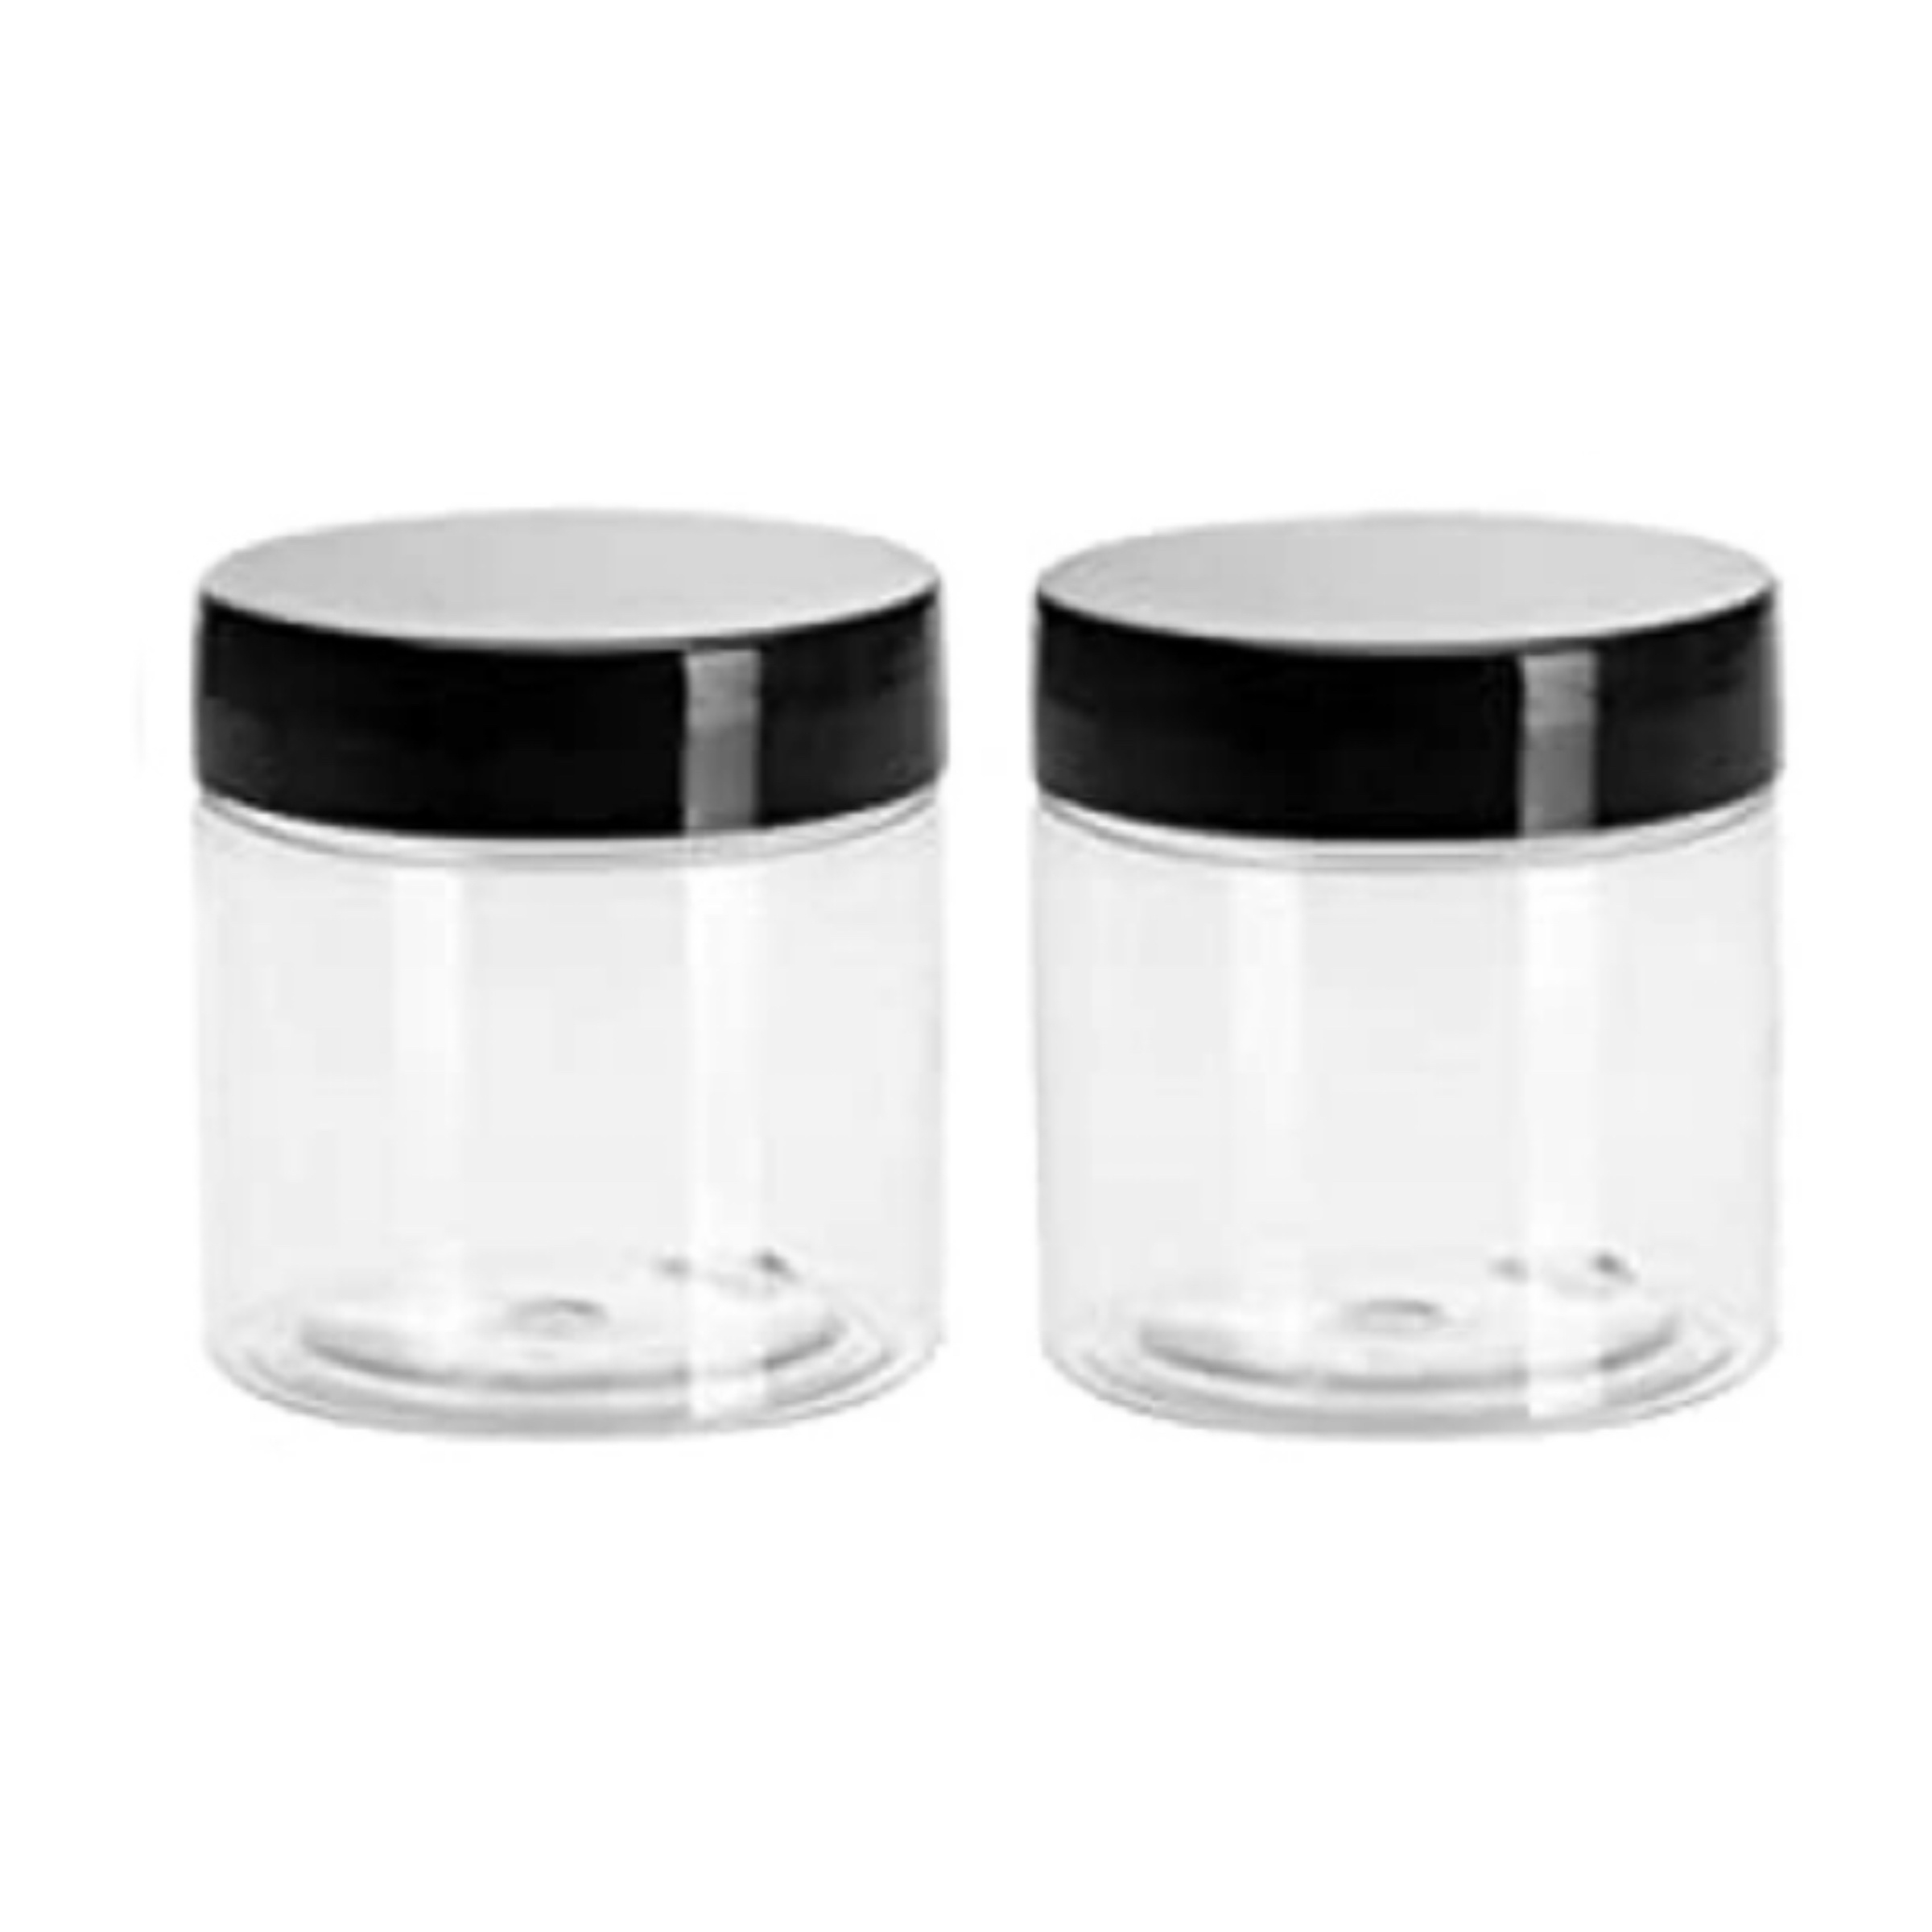 4 SLIME CONTAINERS CLEAR Plastic Jars 2 Oz 4 Oz 6 Oz 8 Oz Twisted Lid Clear  Plastic Wide-mouth Liquids Small Goods Storage Jars Slime Jars 